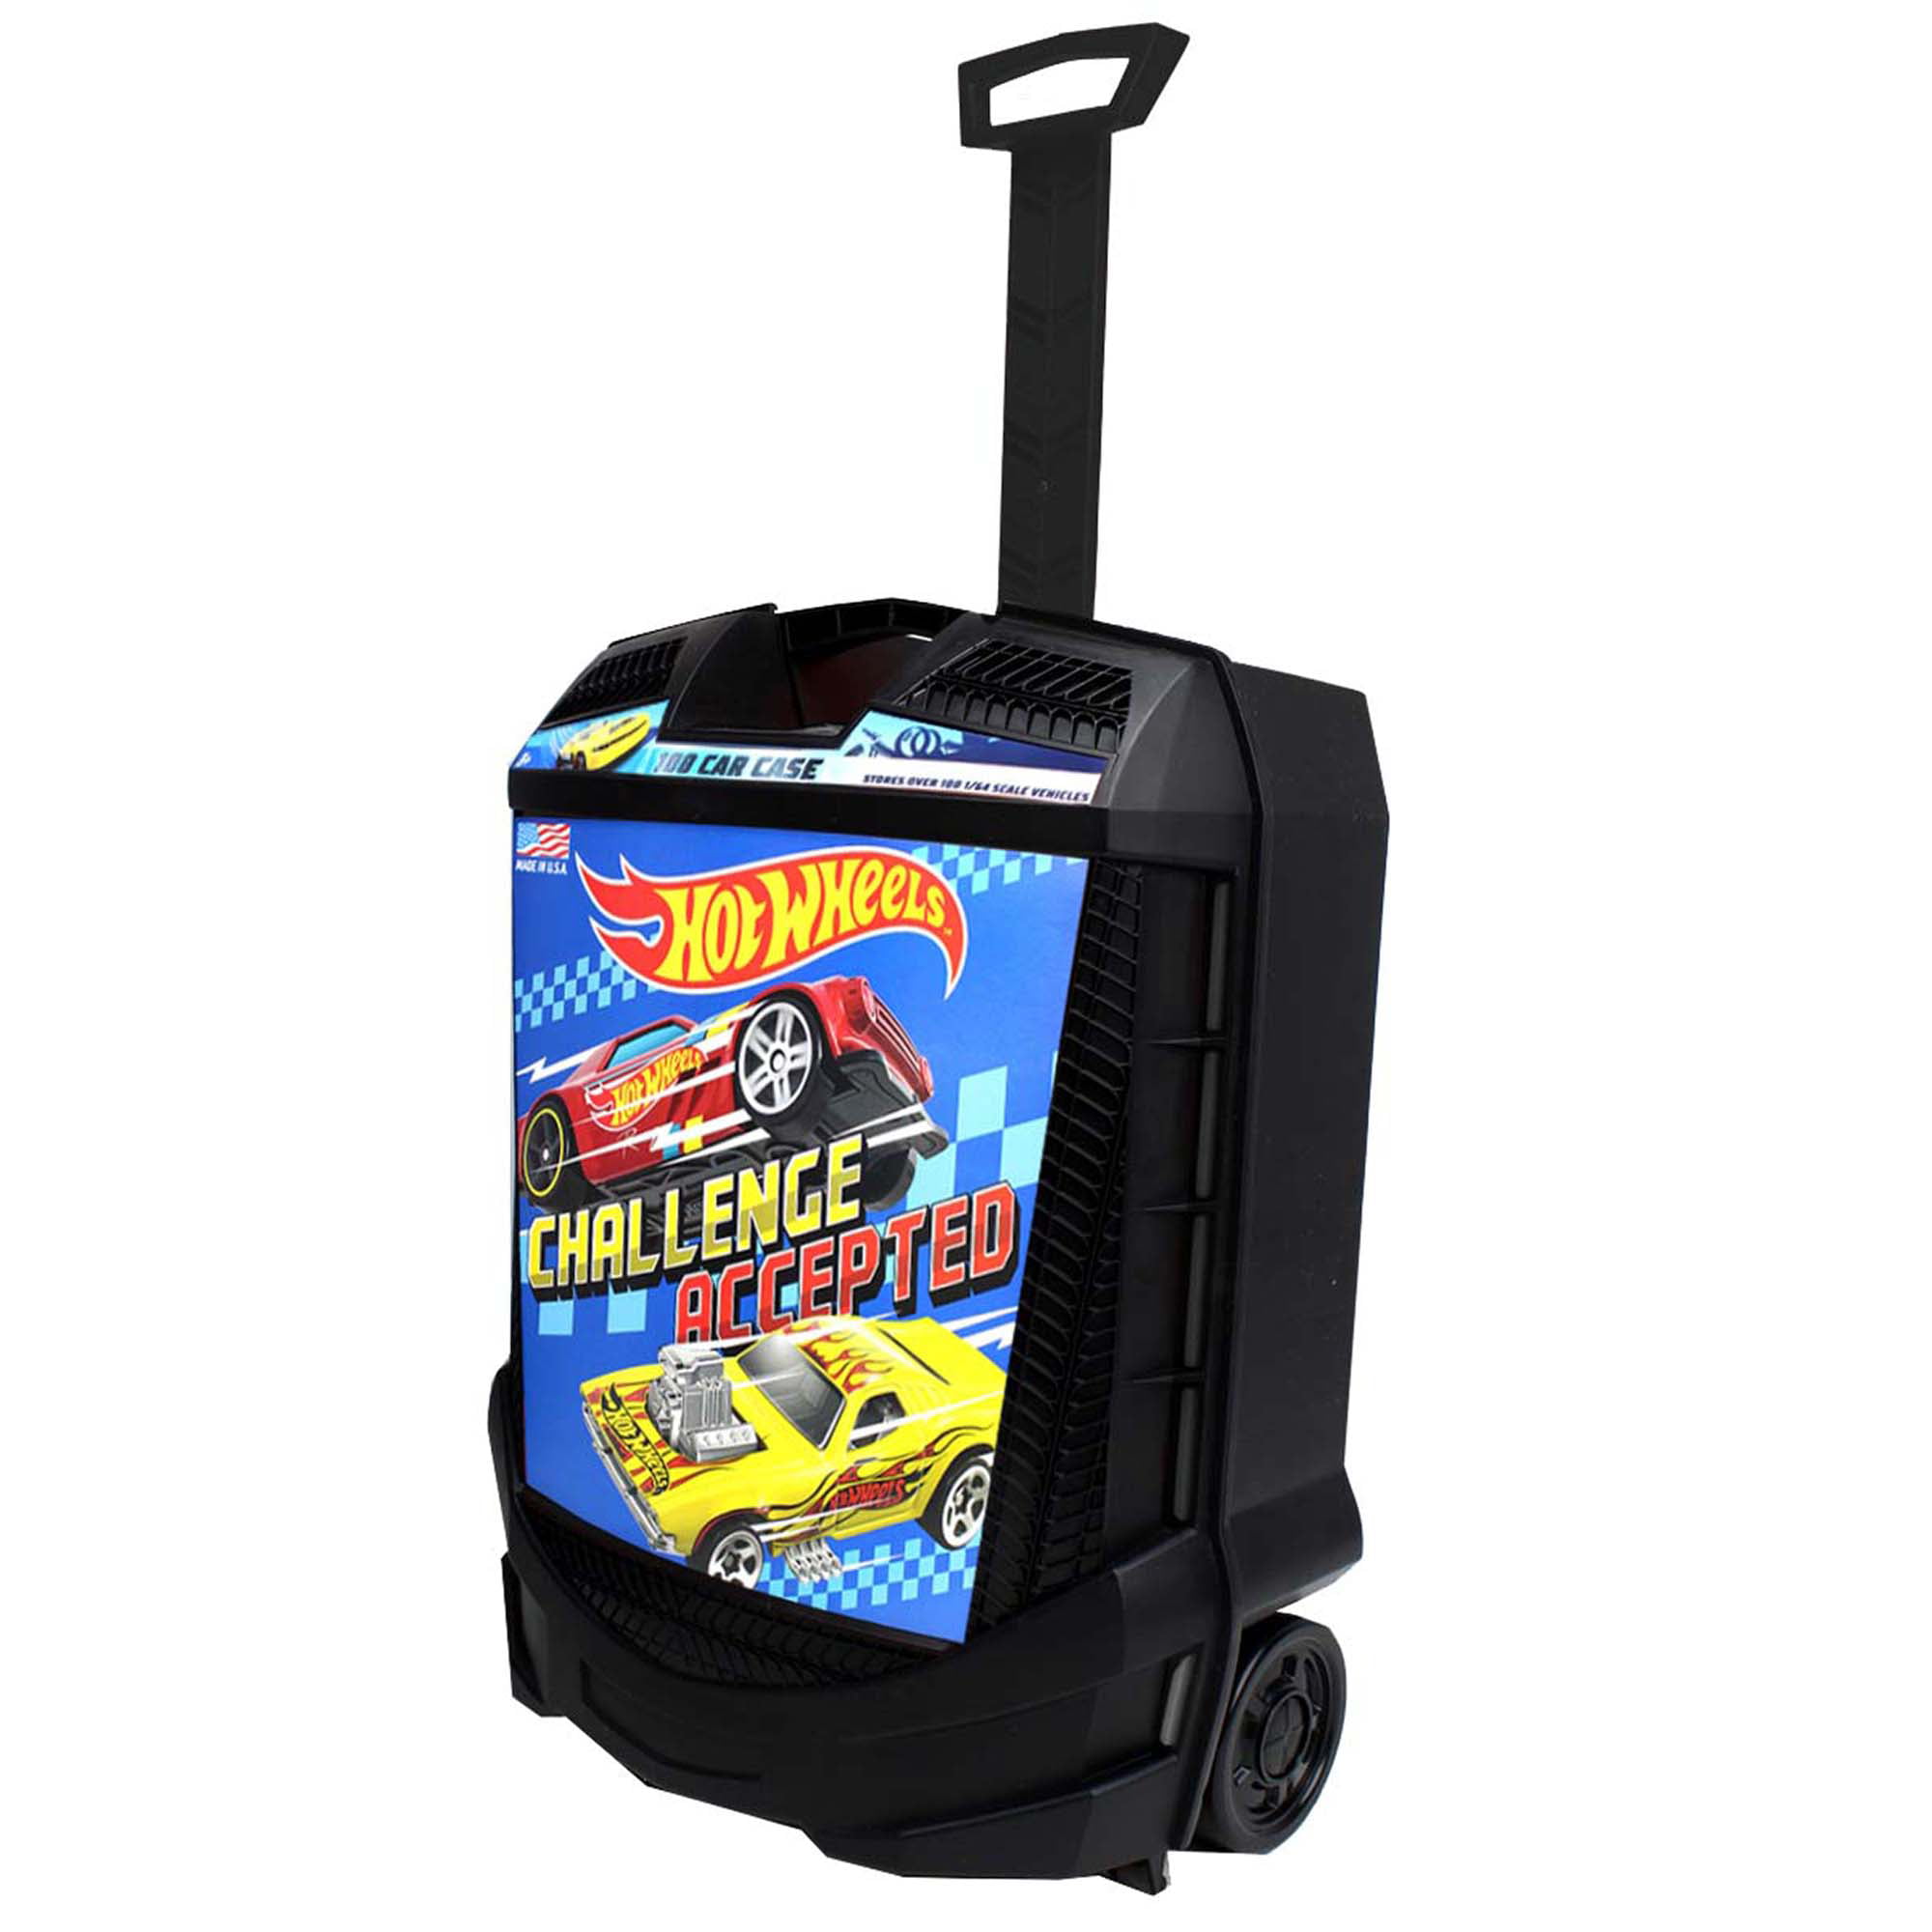 20135 for sale online Hot Wheels 100 Cars with Carry Case Storage